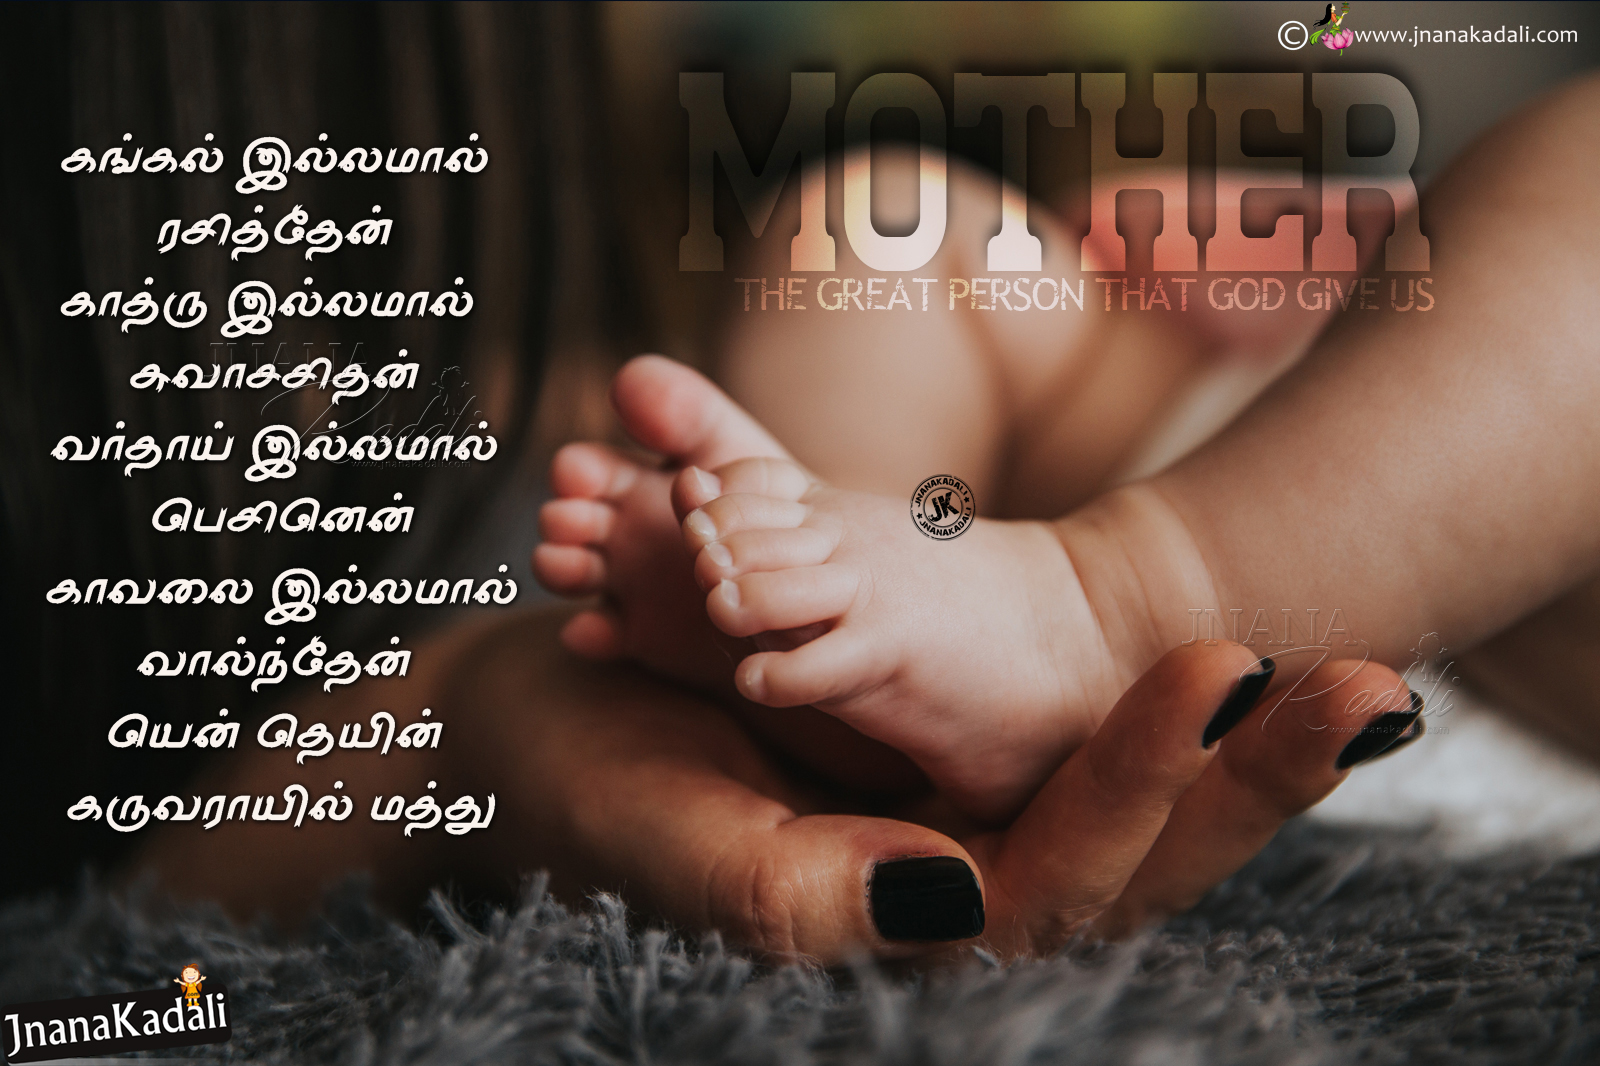 Superb Amma Tamil Kavithaigal Collections - Love and relationship with